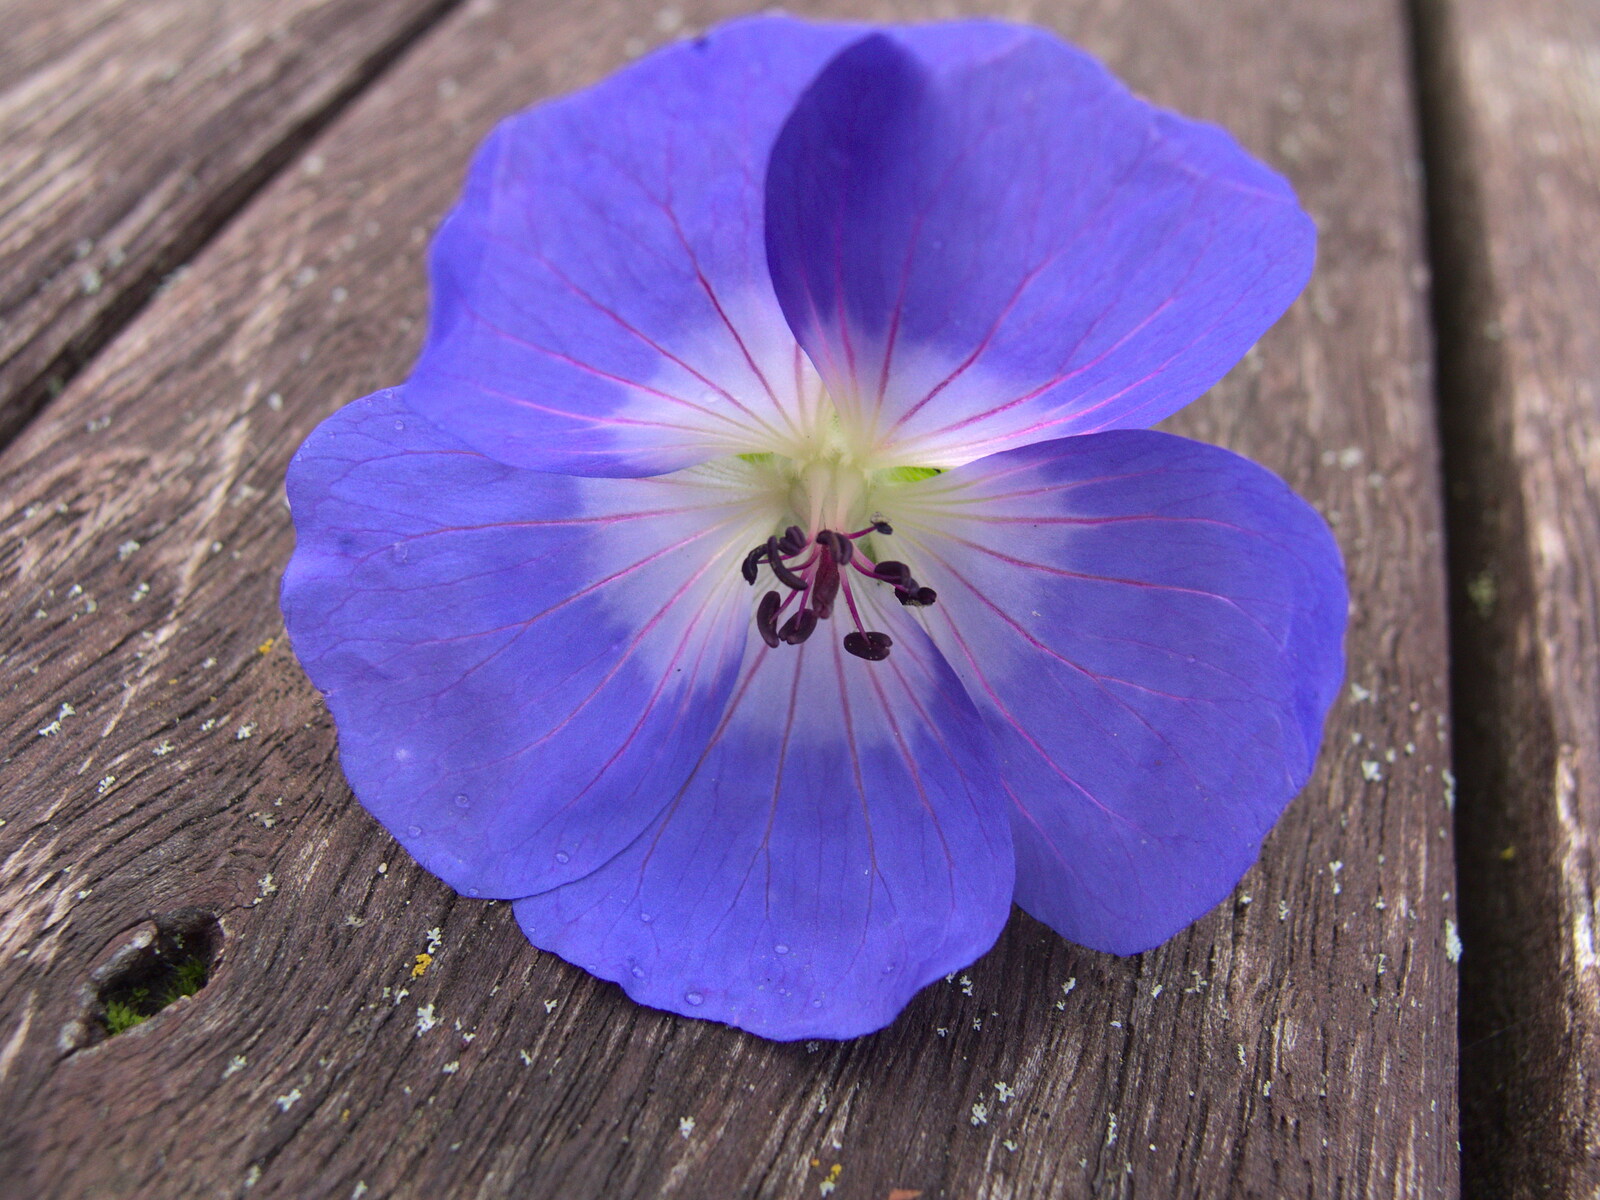 A bright blue flower from Apple Picking and The BBs at Framingham Earl, Norfolk - 25th October 2015